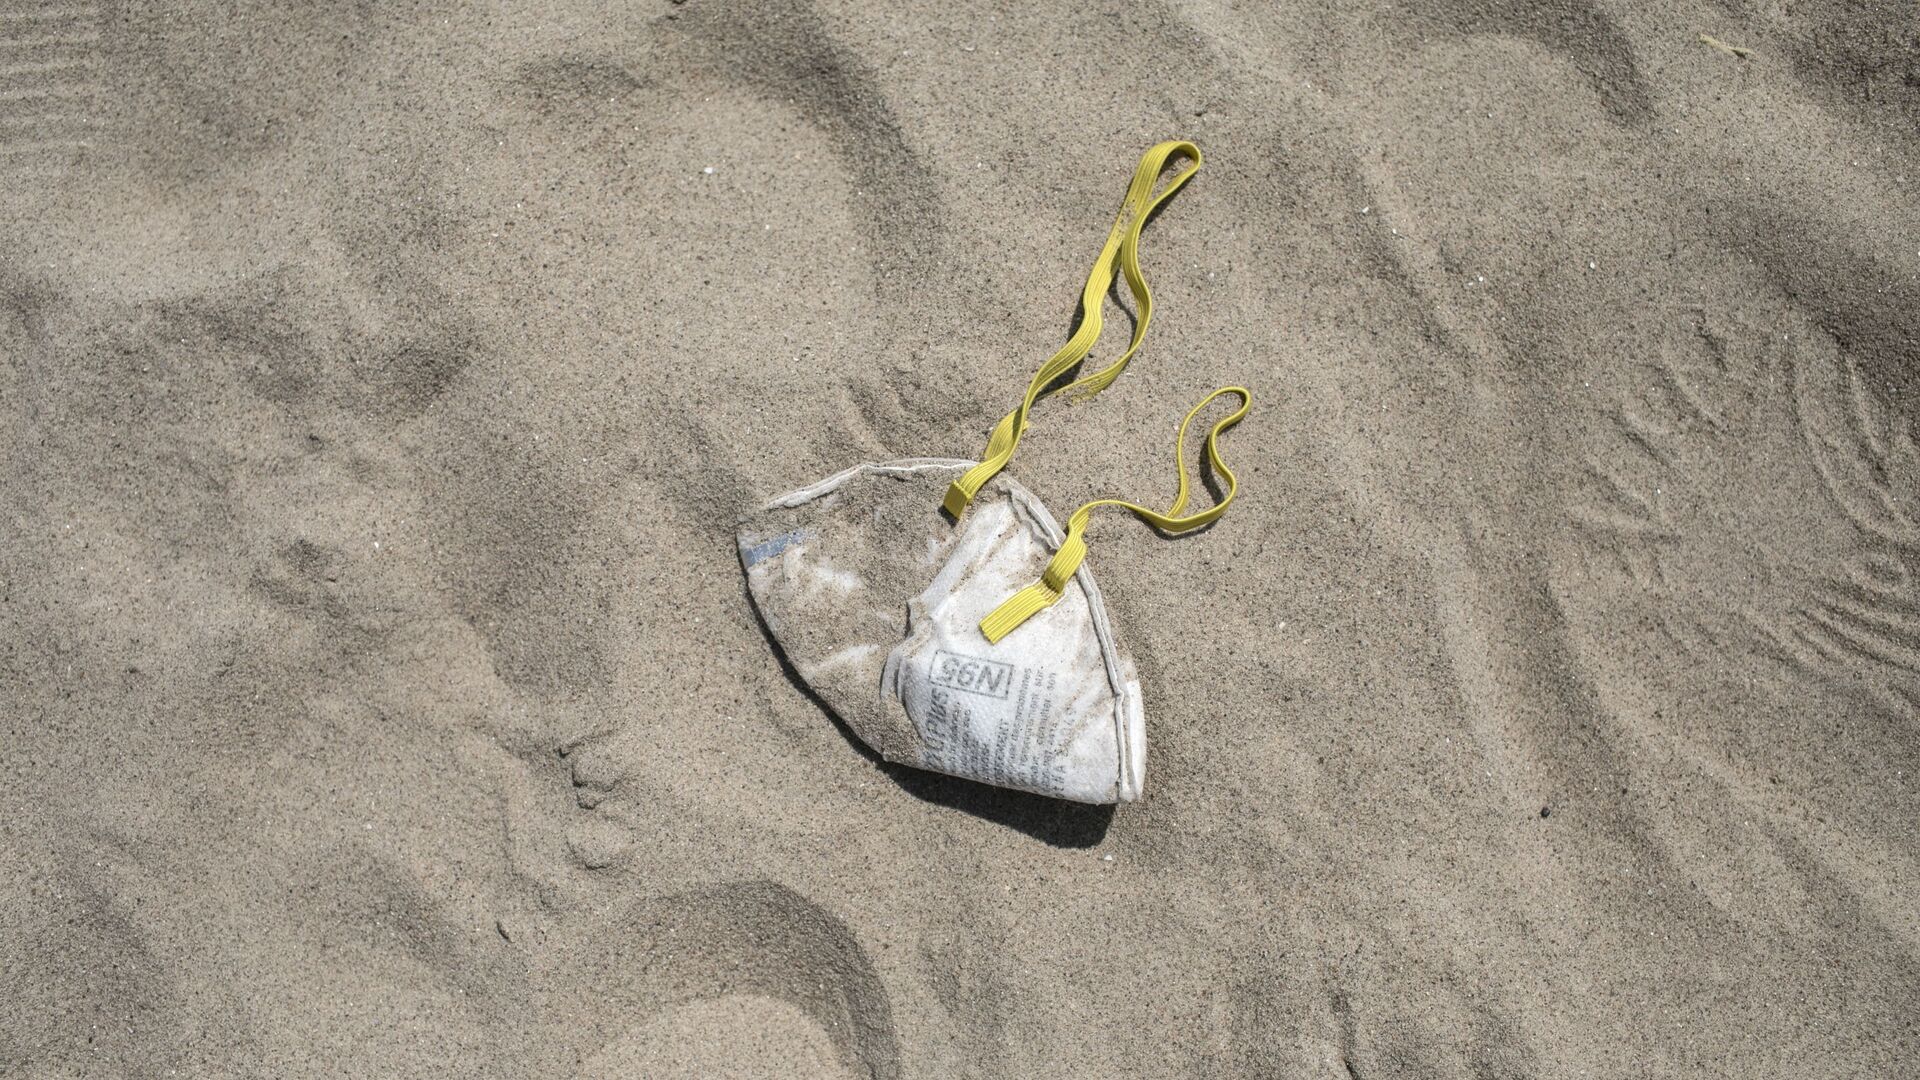 An N95 protective face mask lies in the sand on Brighton Beach in the Brooklyn borough of New York, Saturday, April 25, 2020. With the weather warming up, more people wearing personal protective equipment are venturing out to the parks and streets, though most are still respecting the social distancing guidelines for the COVID-19 coronavirus. - Sputnik International, 1920, 26.05.2021